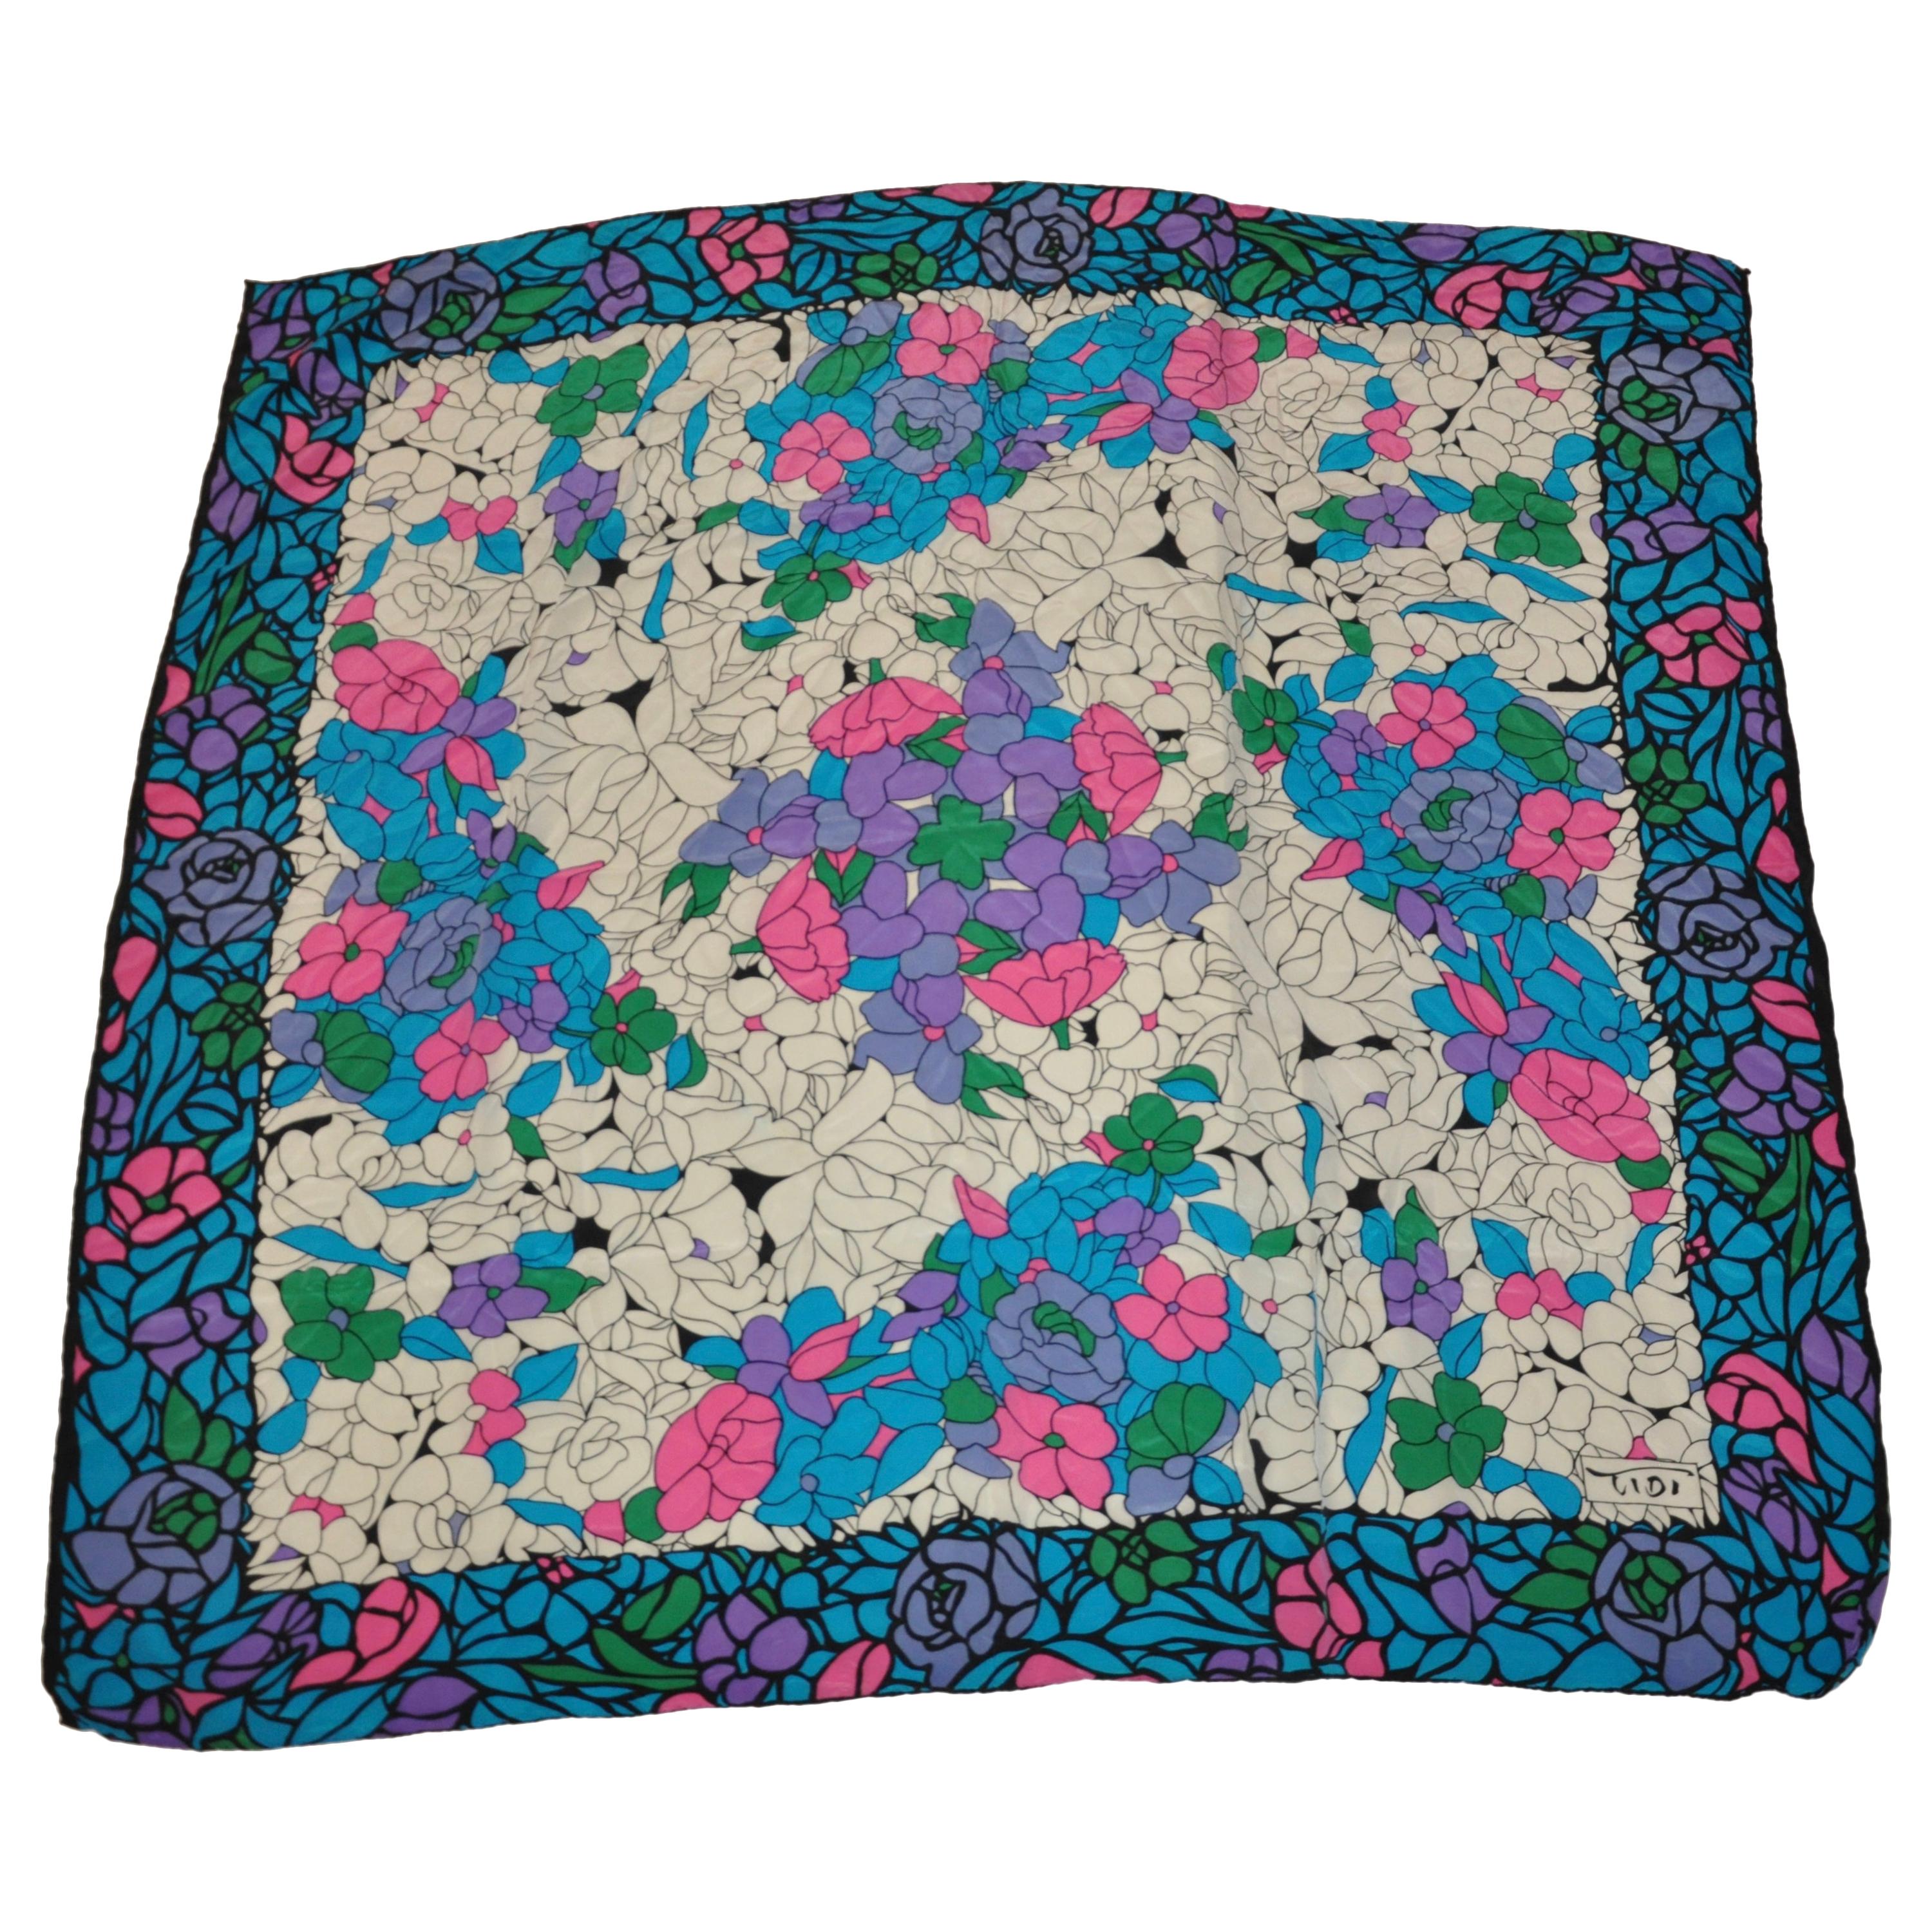 Tibi Wonderfully Whimsical Shades of Turquoise & Popping Pinks Floral Silk Scarf